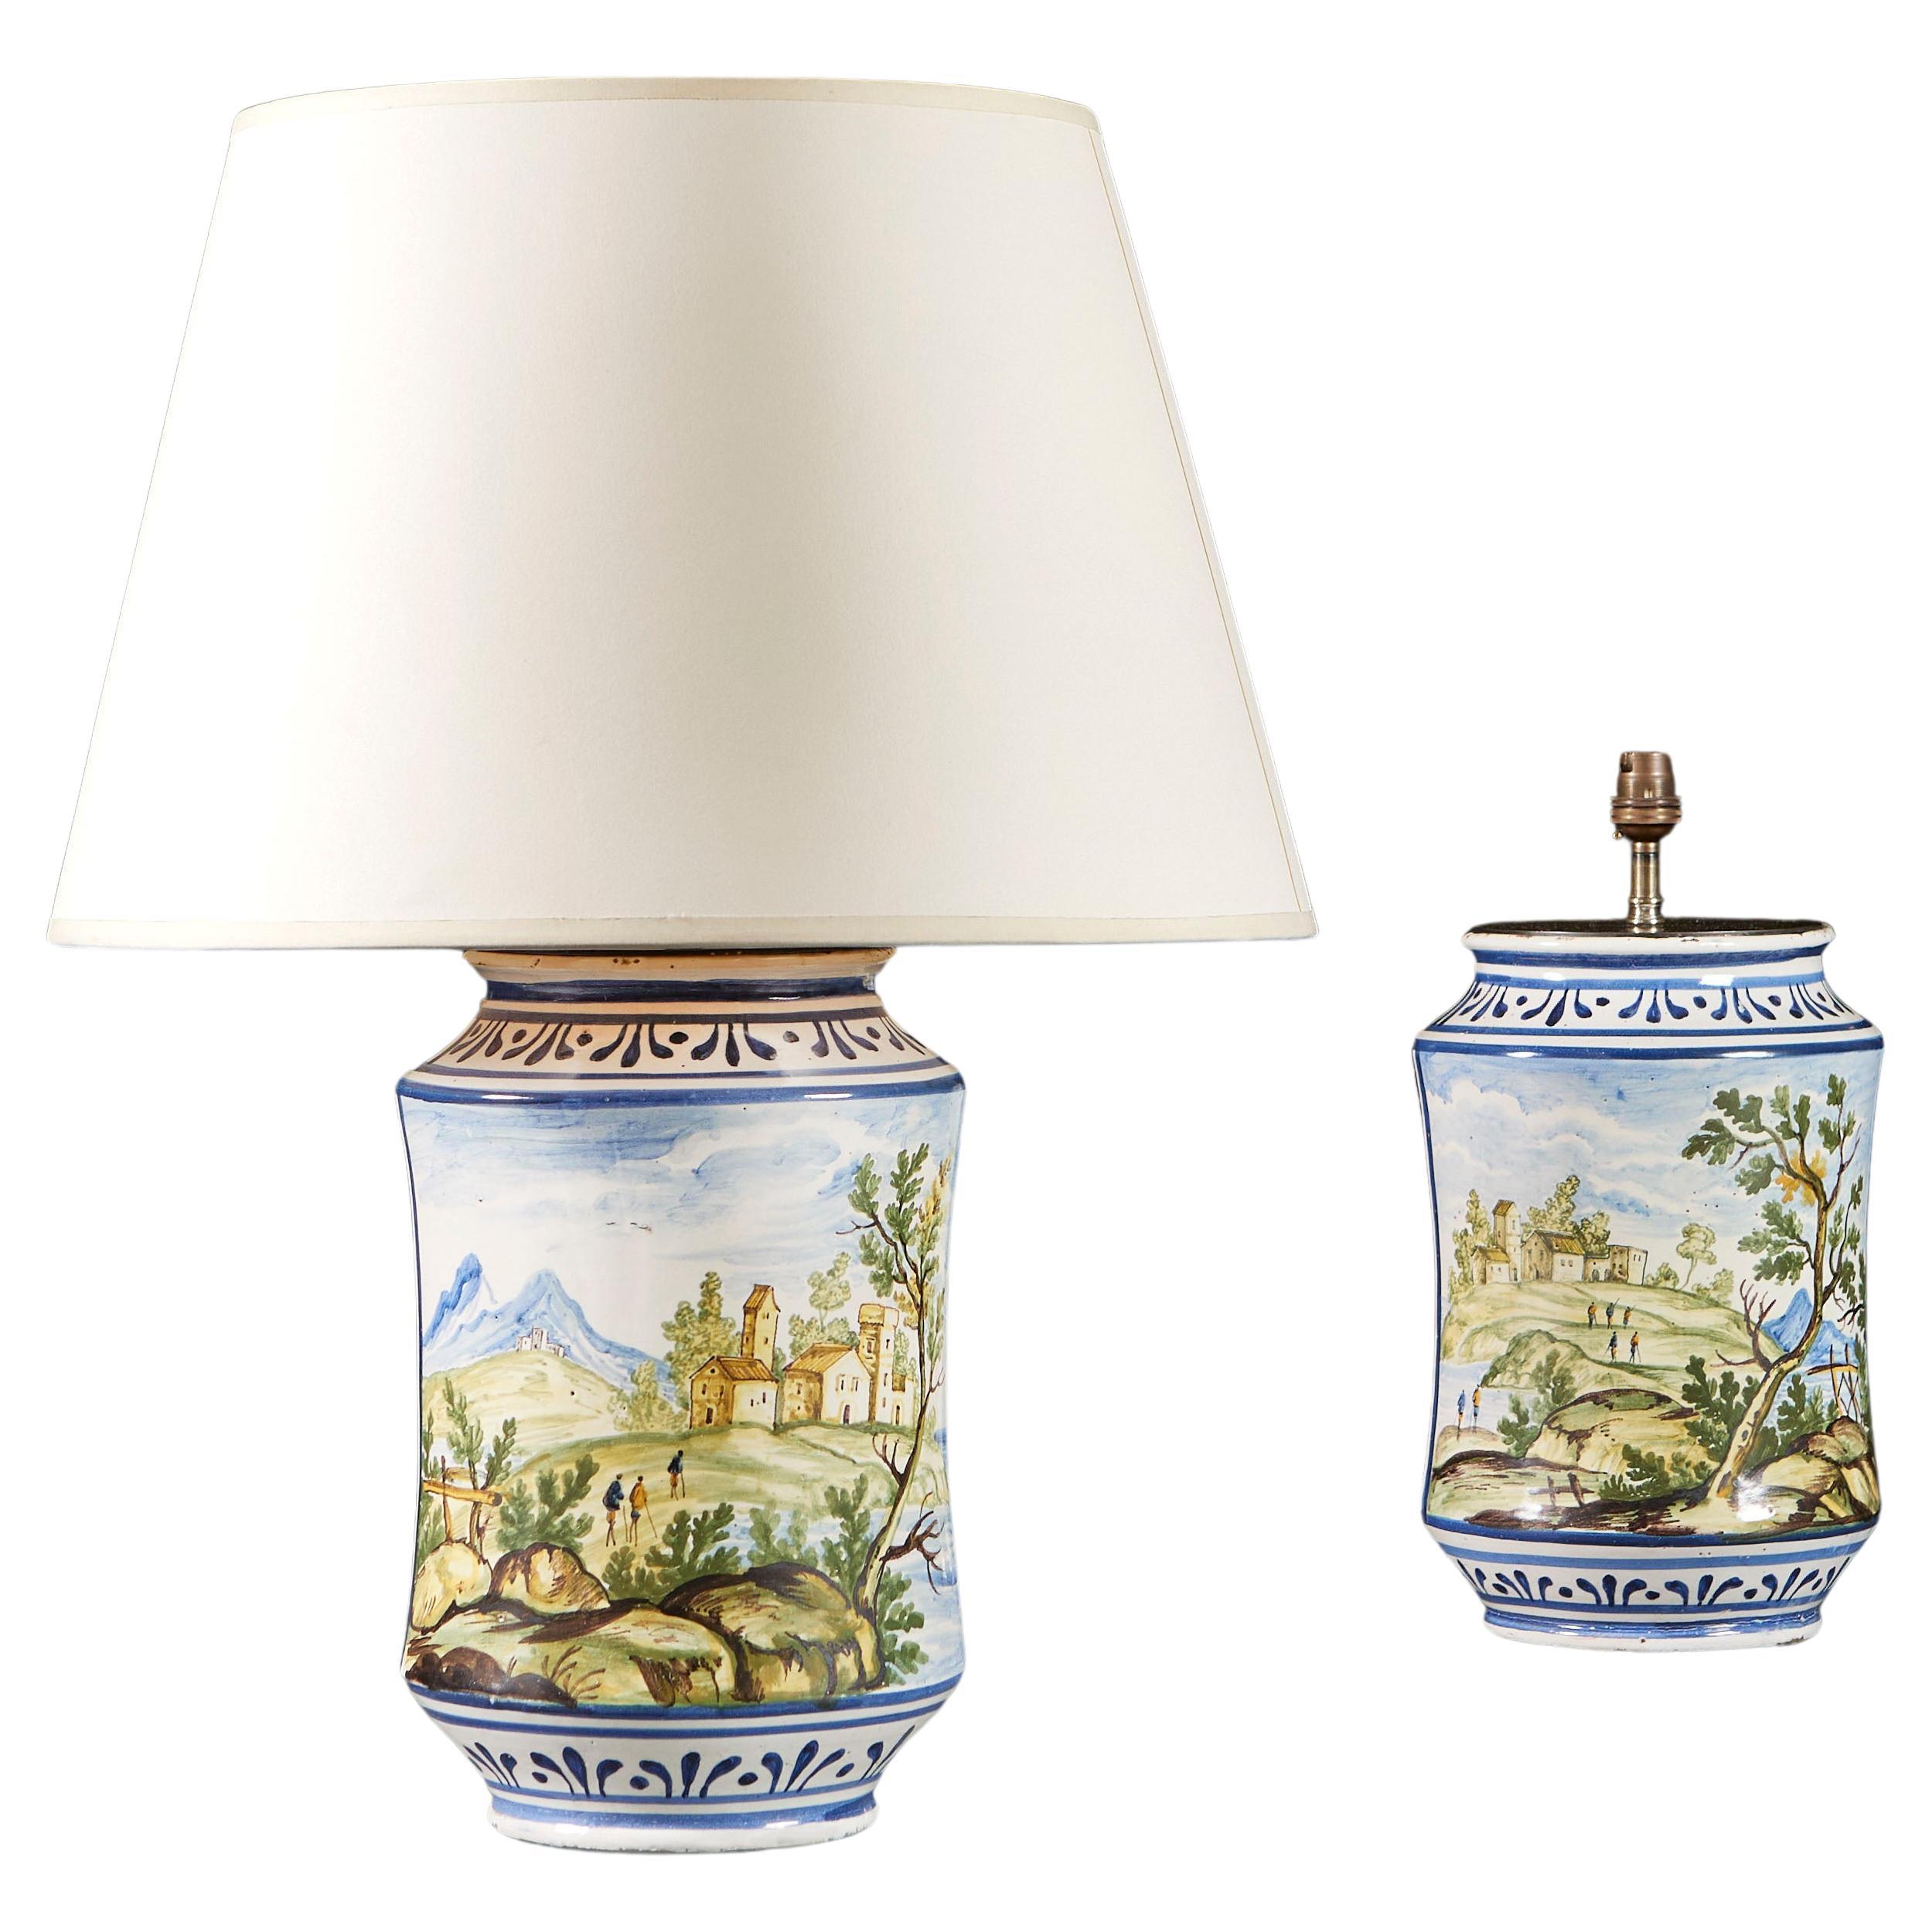 A Large Pair of 19th Century Italian Abarello Vases as Lamps